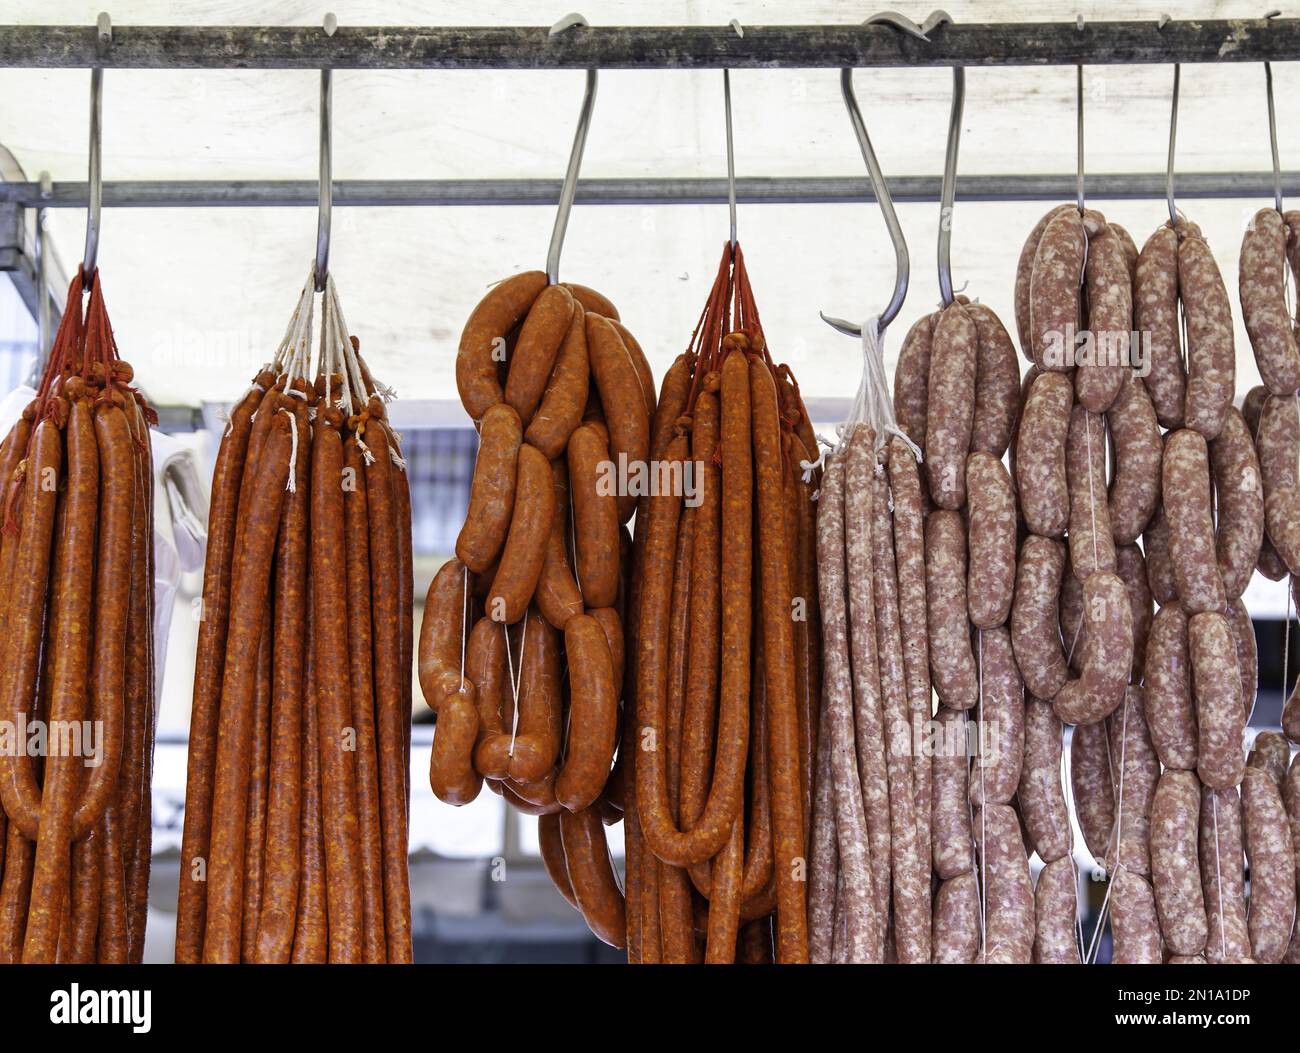 Detail of dried pork sausage, fatty and unhealthy food Stock Photo